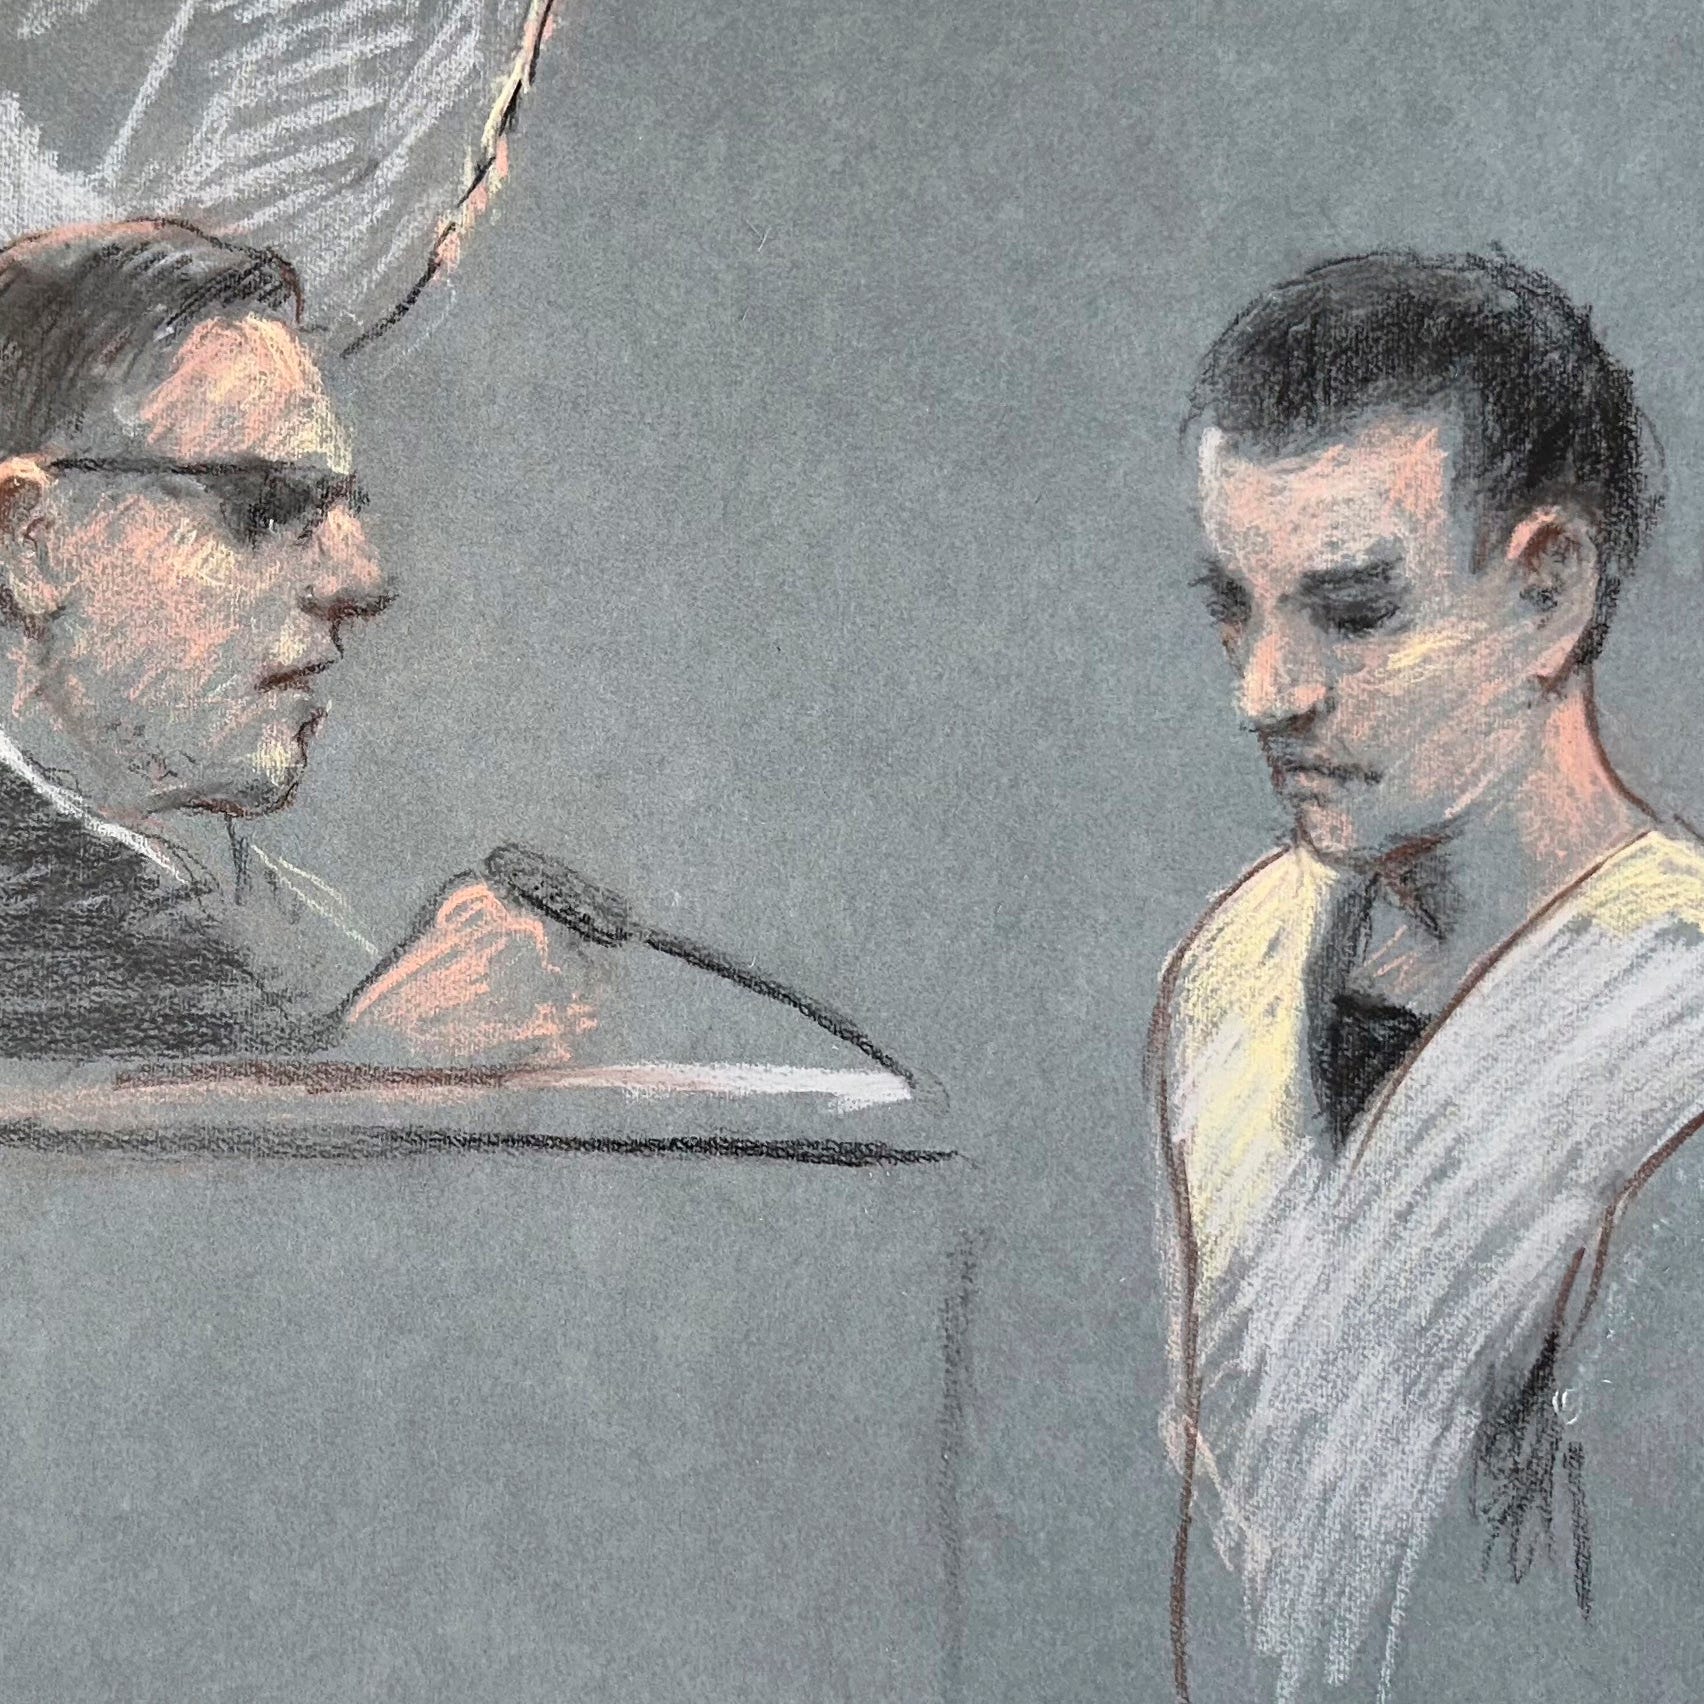 Massachusetts Air National Guardsman Jack Teixeira, right, appears in U.S. District Court in Boston. A judge is expected to hear arguments Thursday over whether Teixeira, accused of leaking highly classified military documents about the Ukraine war and other issues, should remain in jail while he awaits trial.